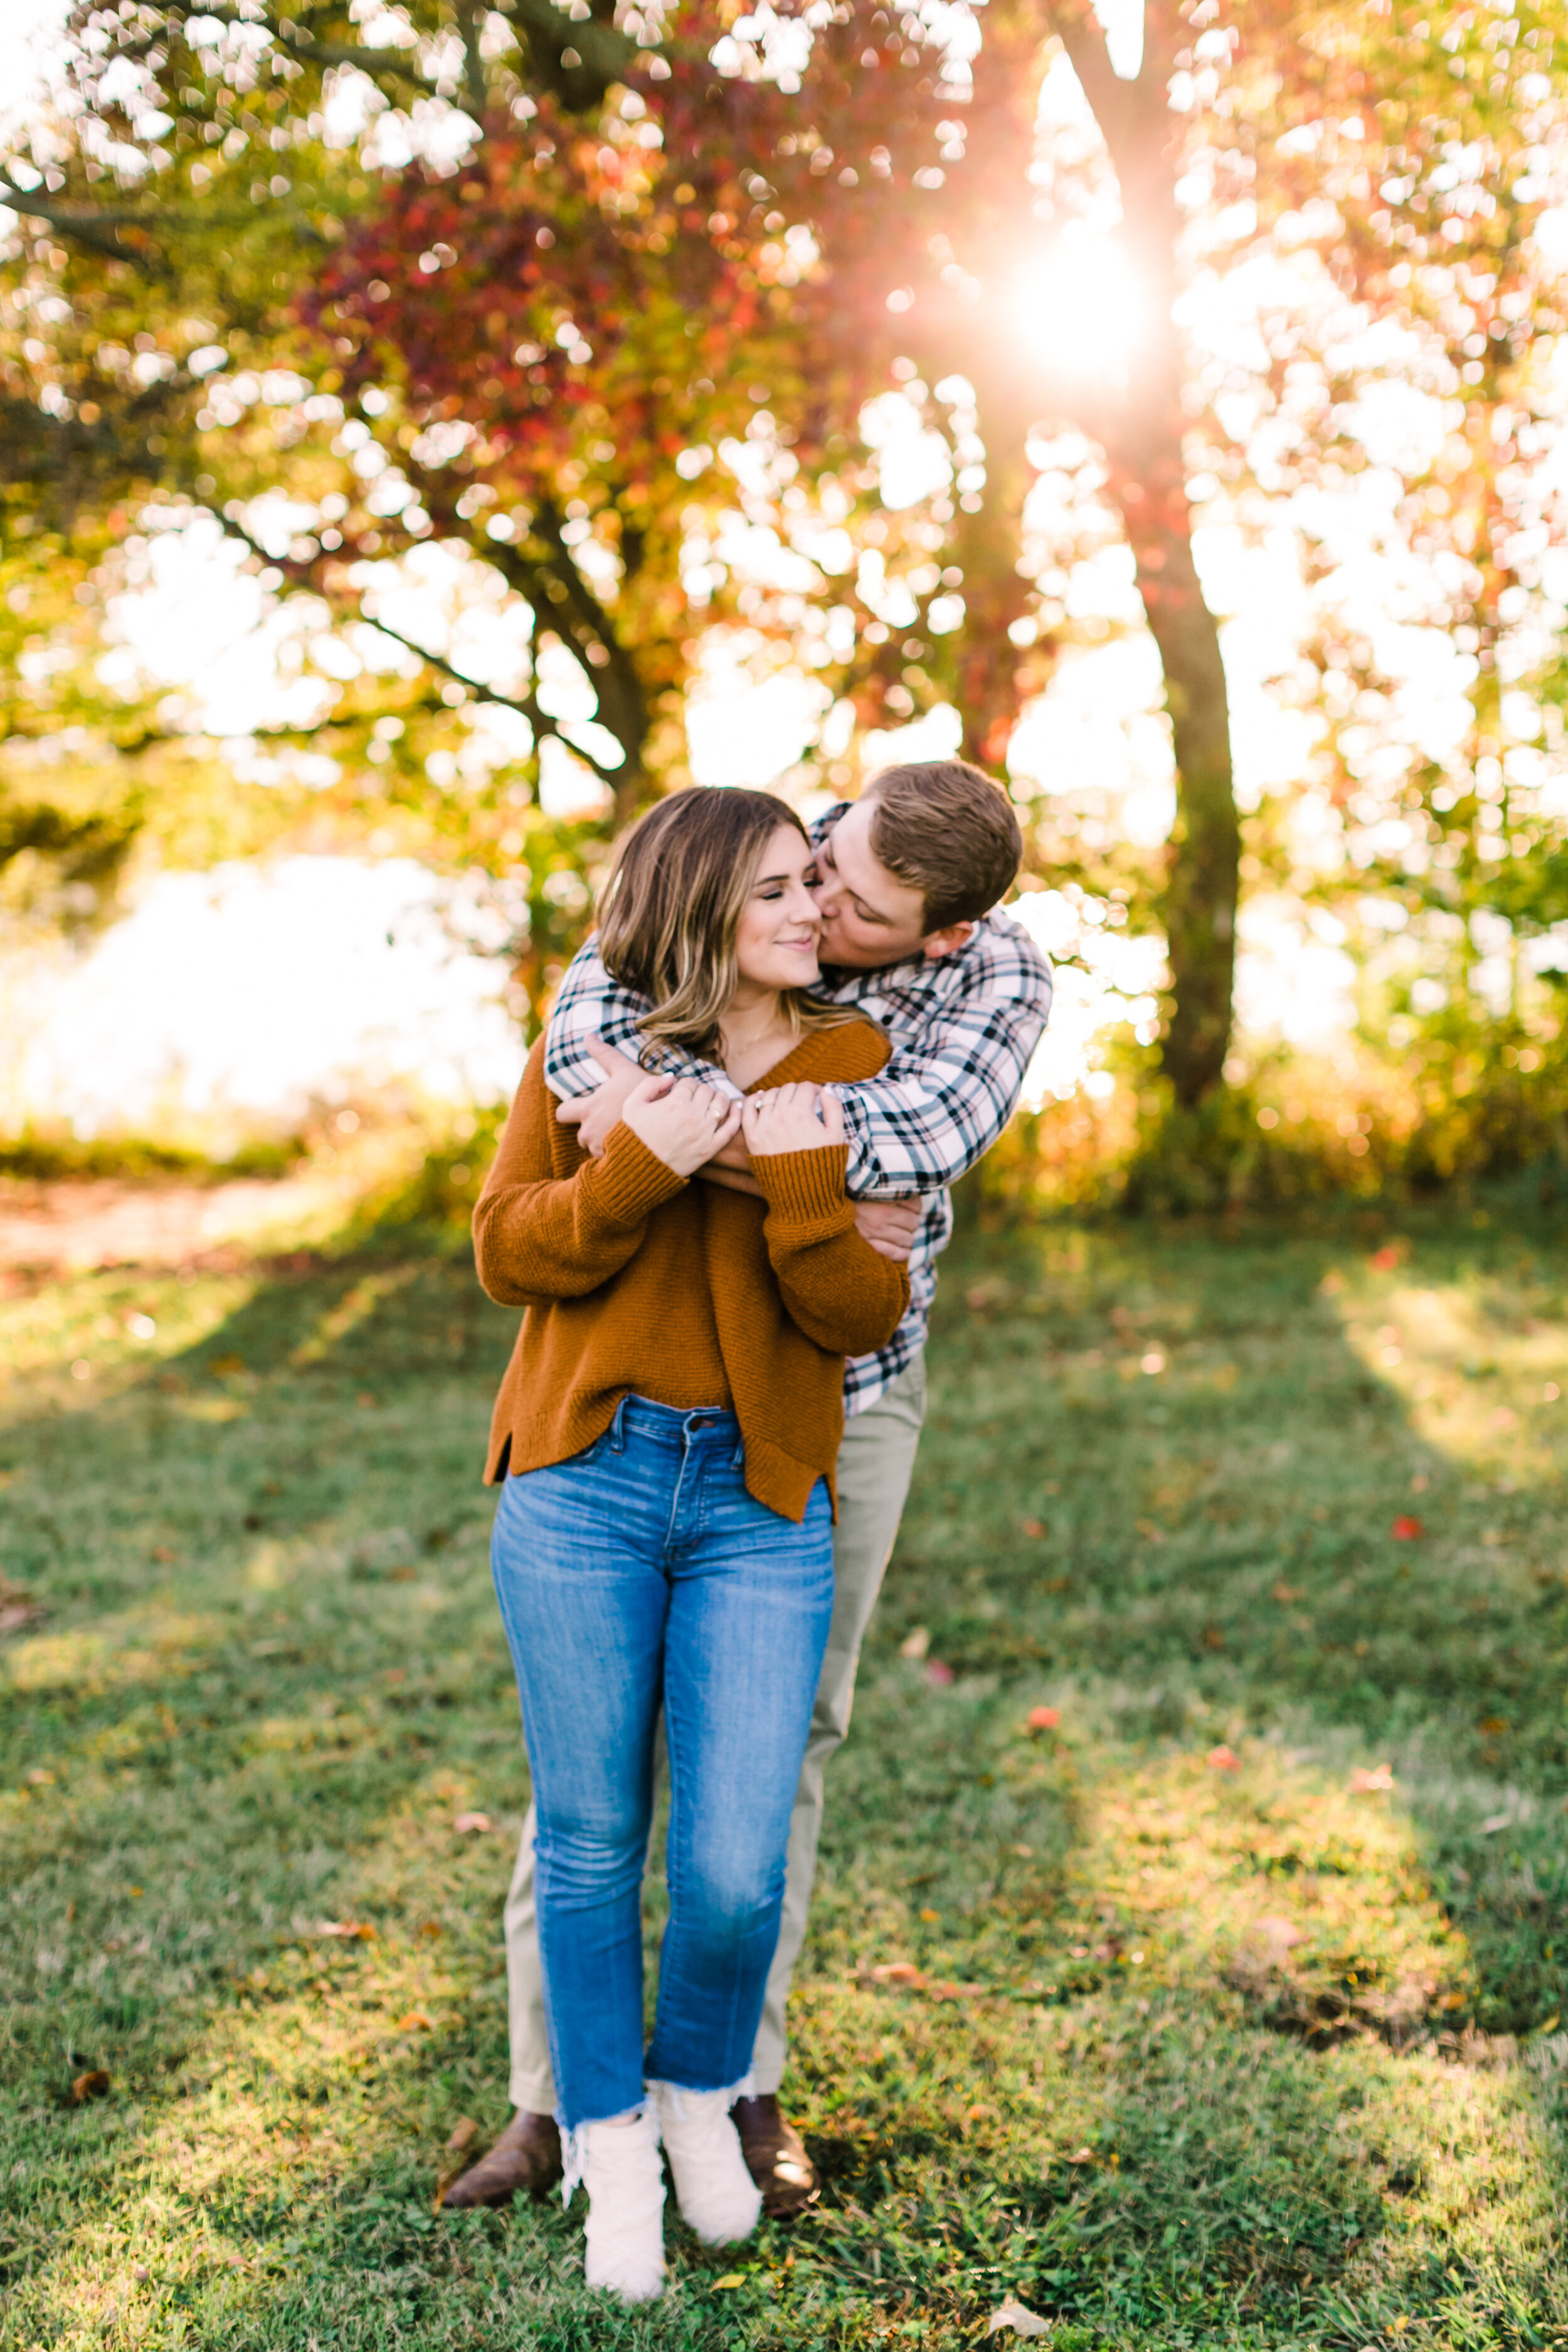 Tennessee+Fall+Engagement+Photos+Puppy (37 of 63).jpg